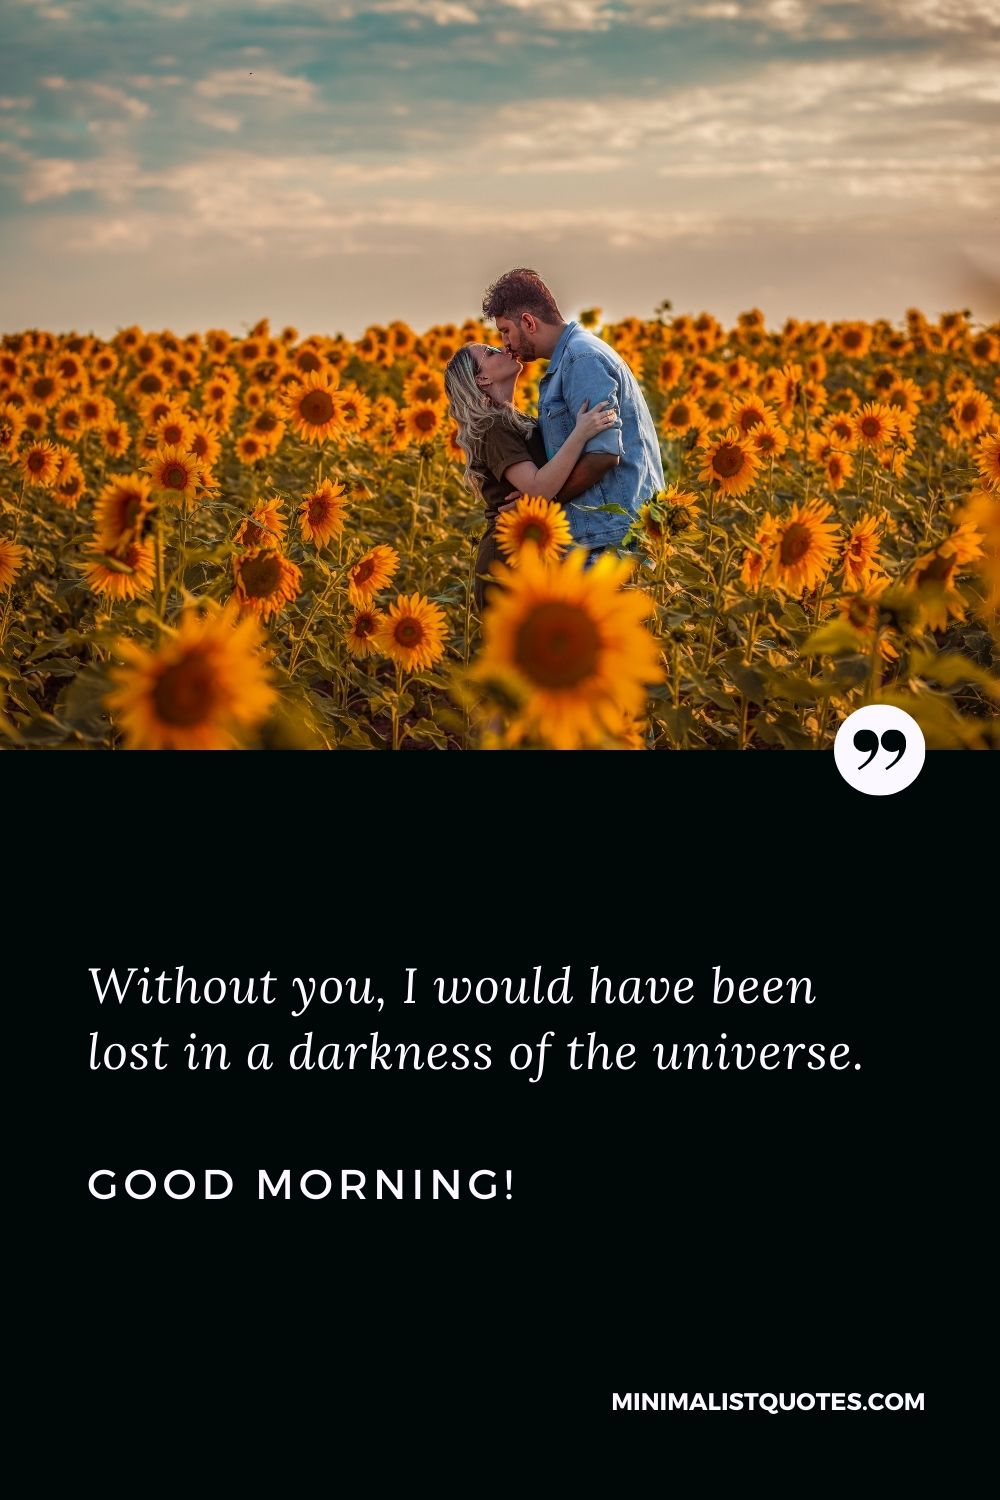 Sweet good morning message for my love: Without you, I would have been lost in a darkness of the universe. Good Morning!